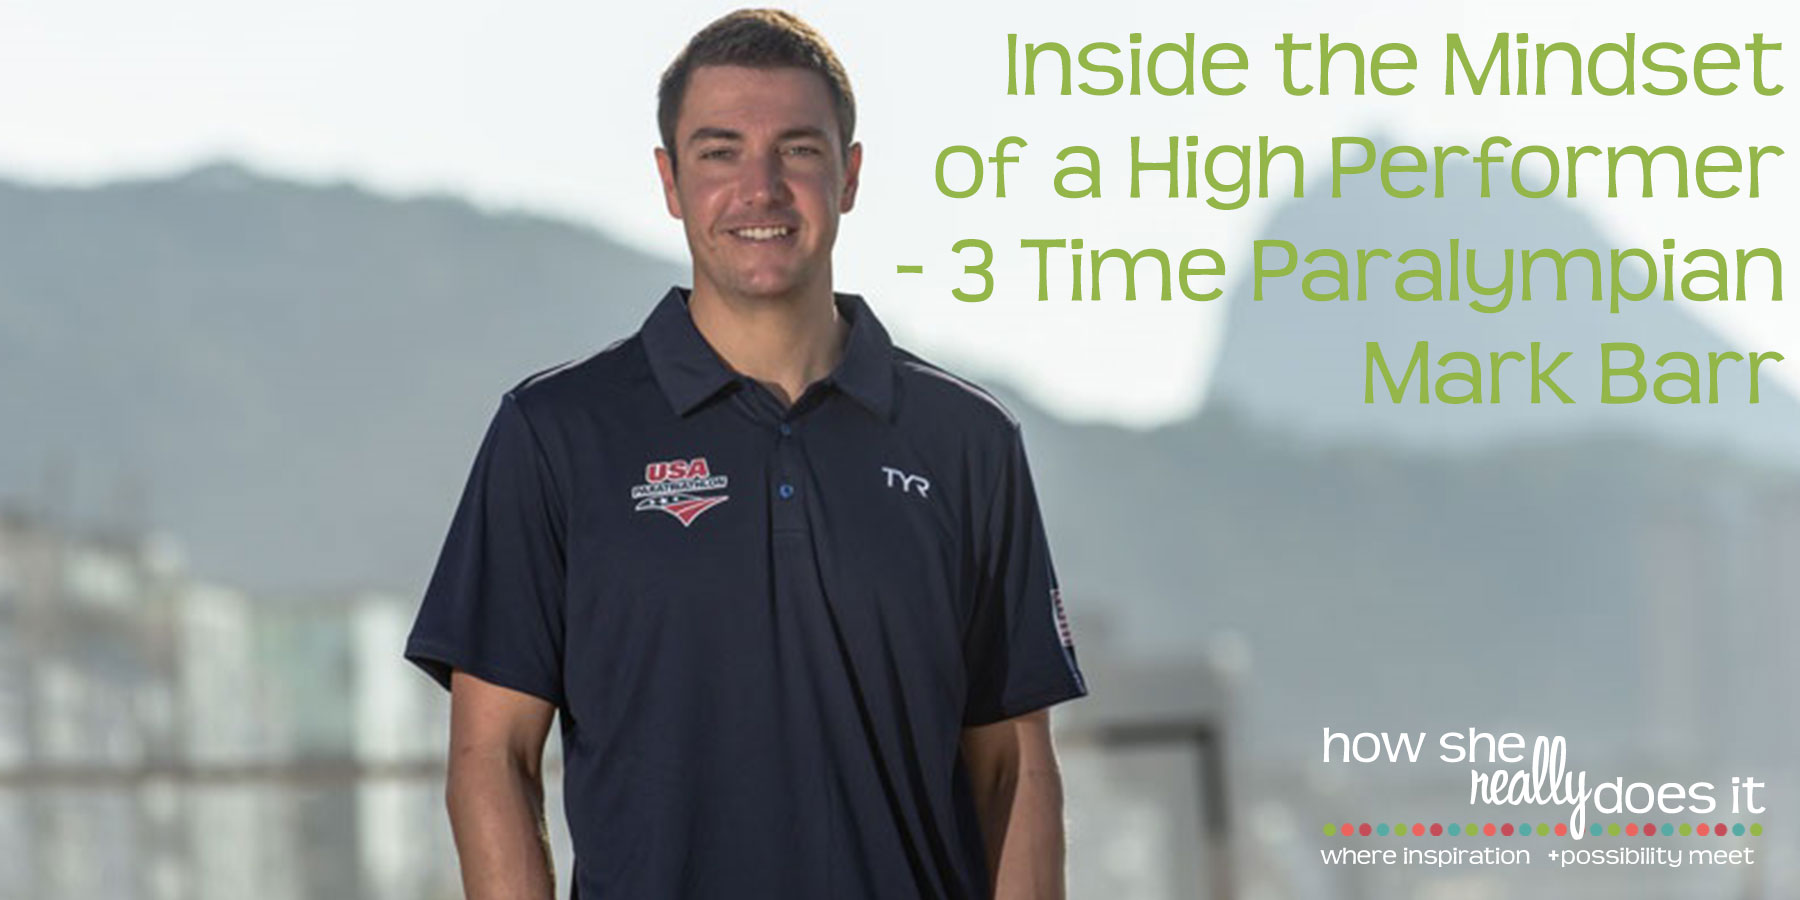 Inside the Mindset of a High Performer - 3 Time Paralympian Mark Barr